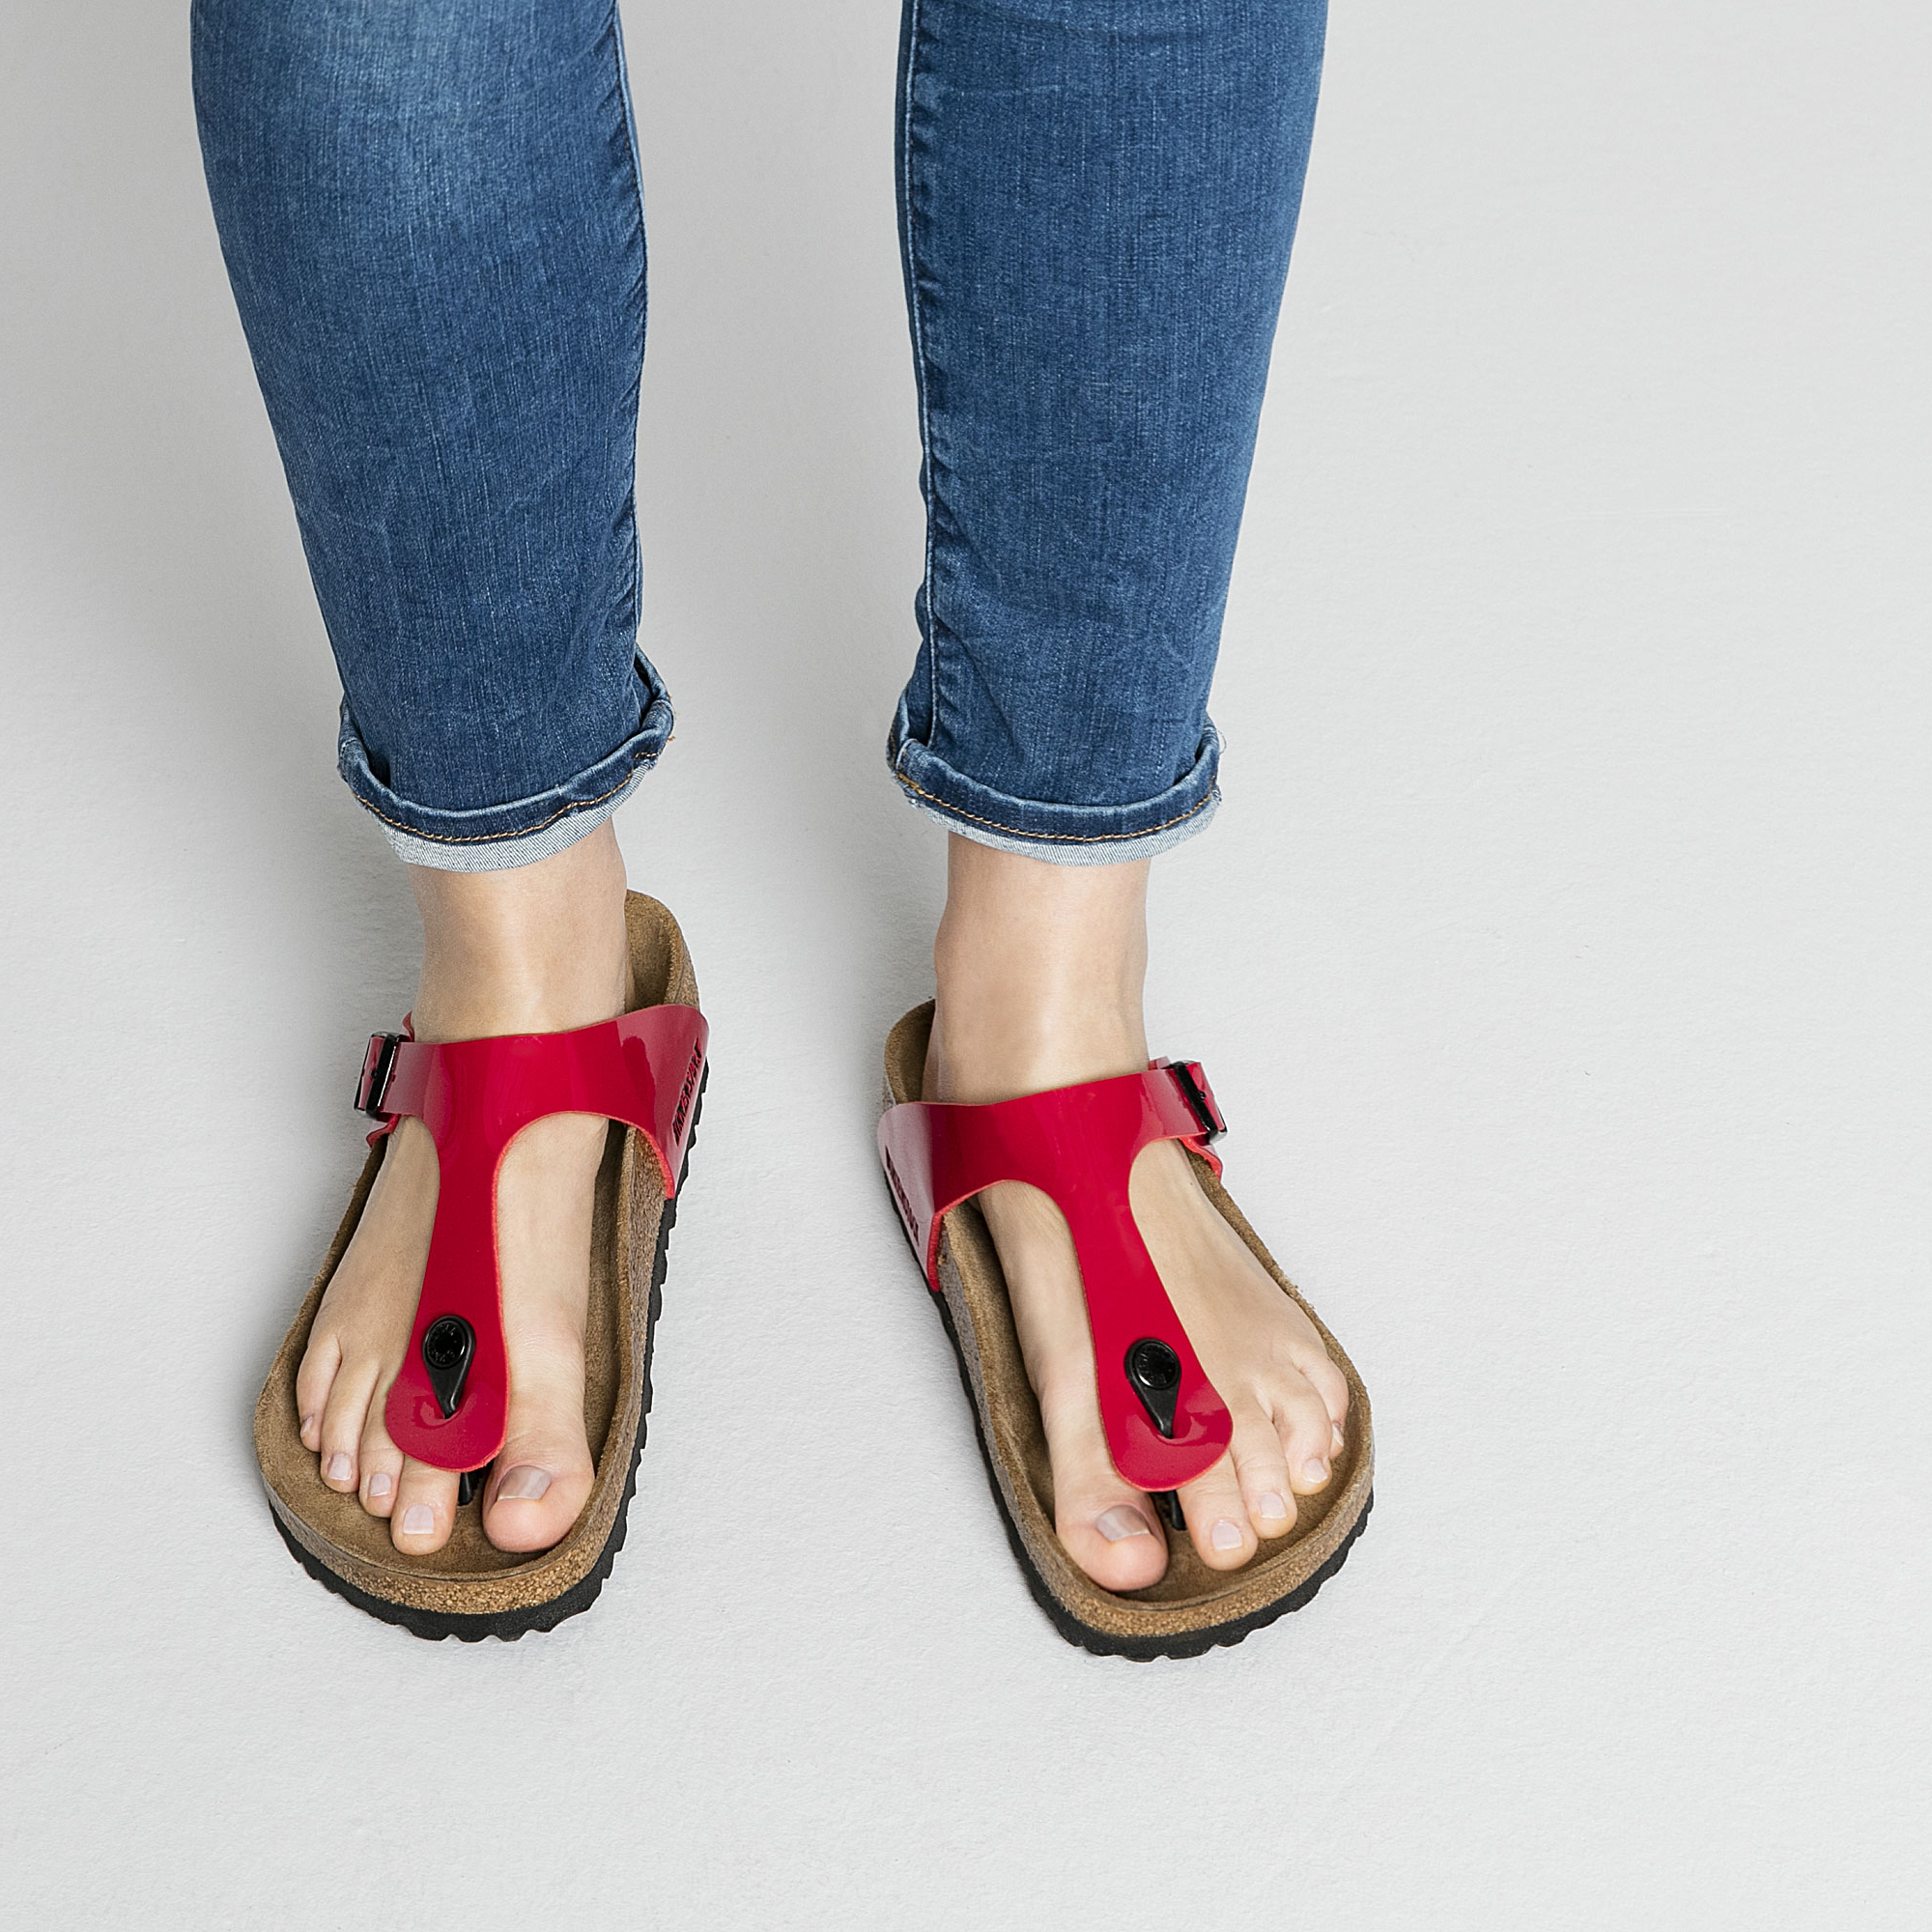 birkenstock red patent leather